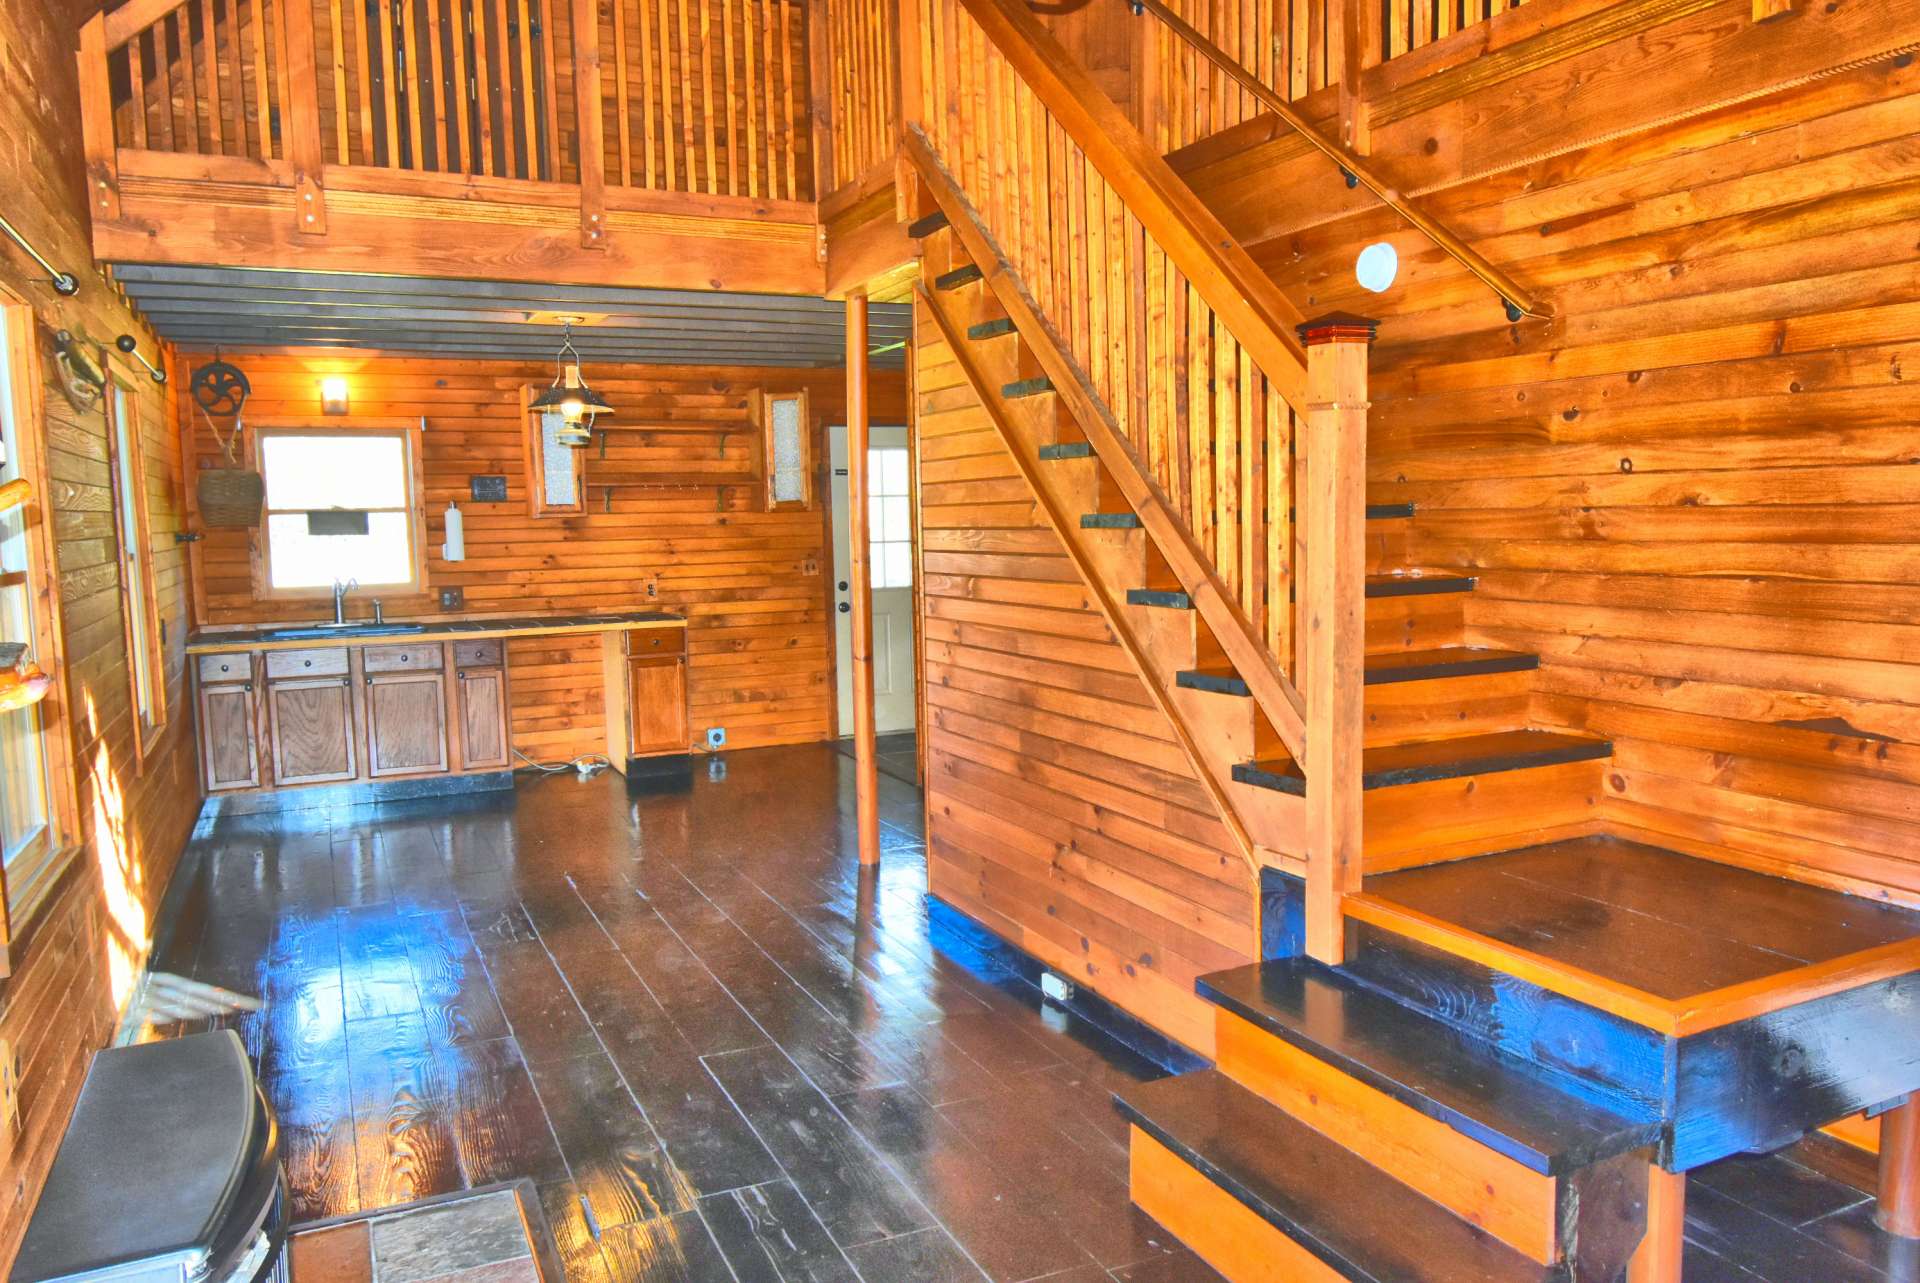 This sweet cabin was hand crafted and built by owners. You will appreciate the many custom details.